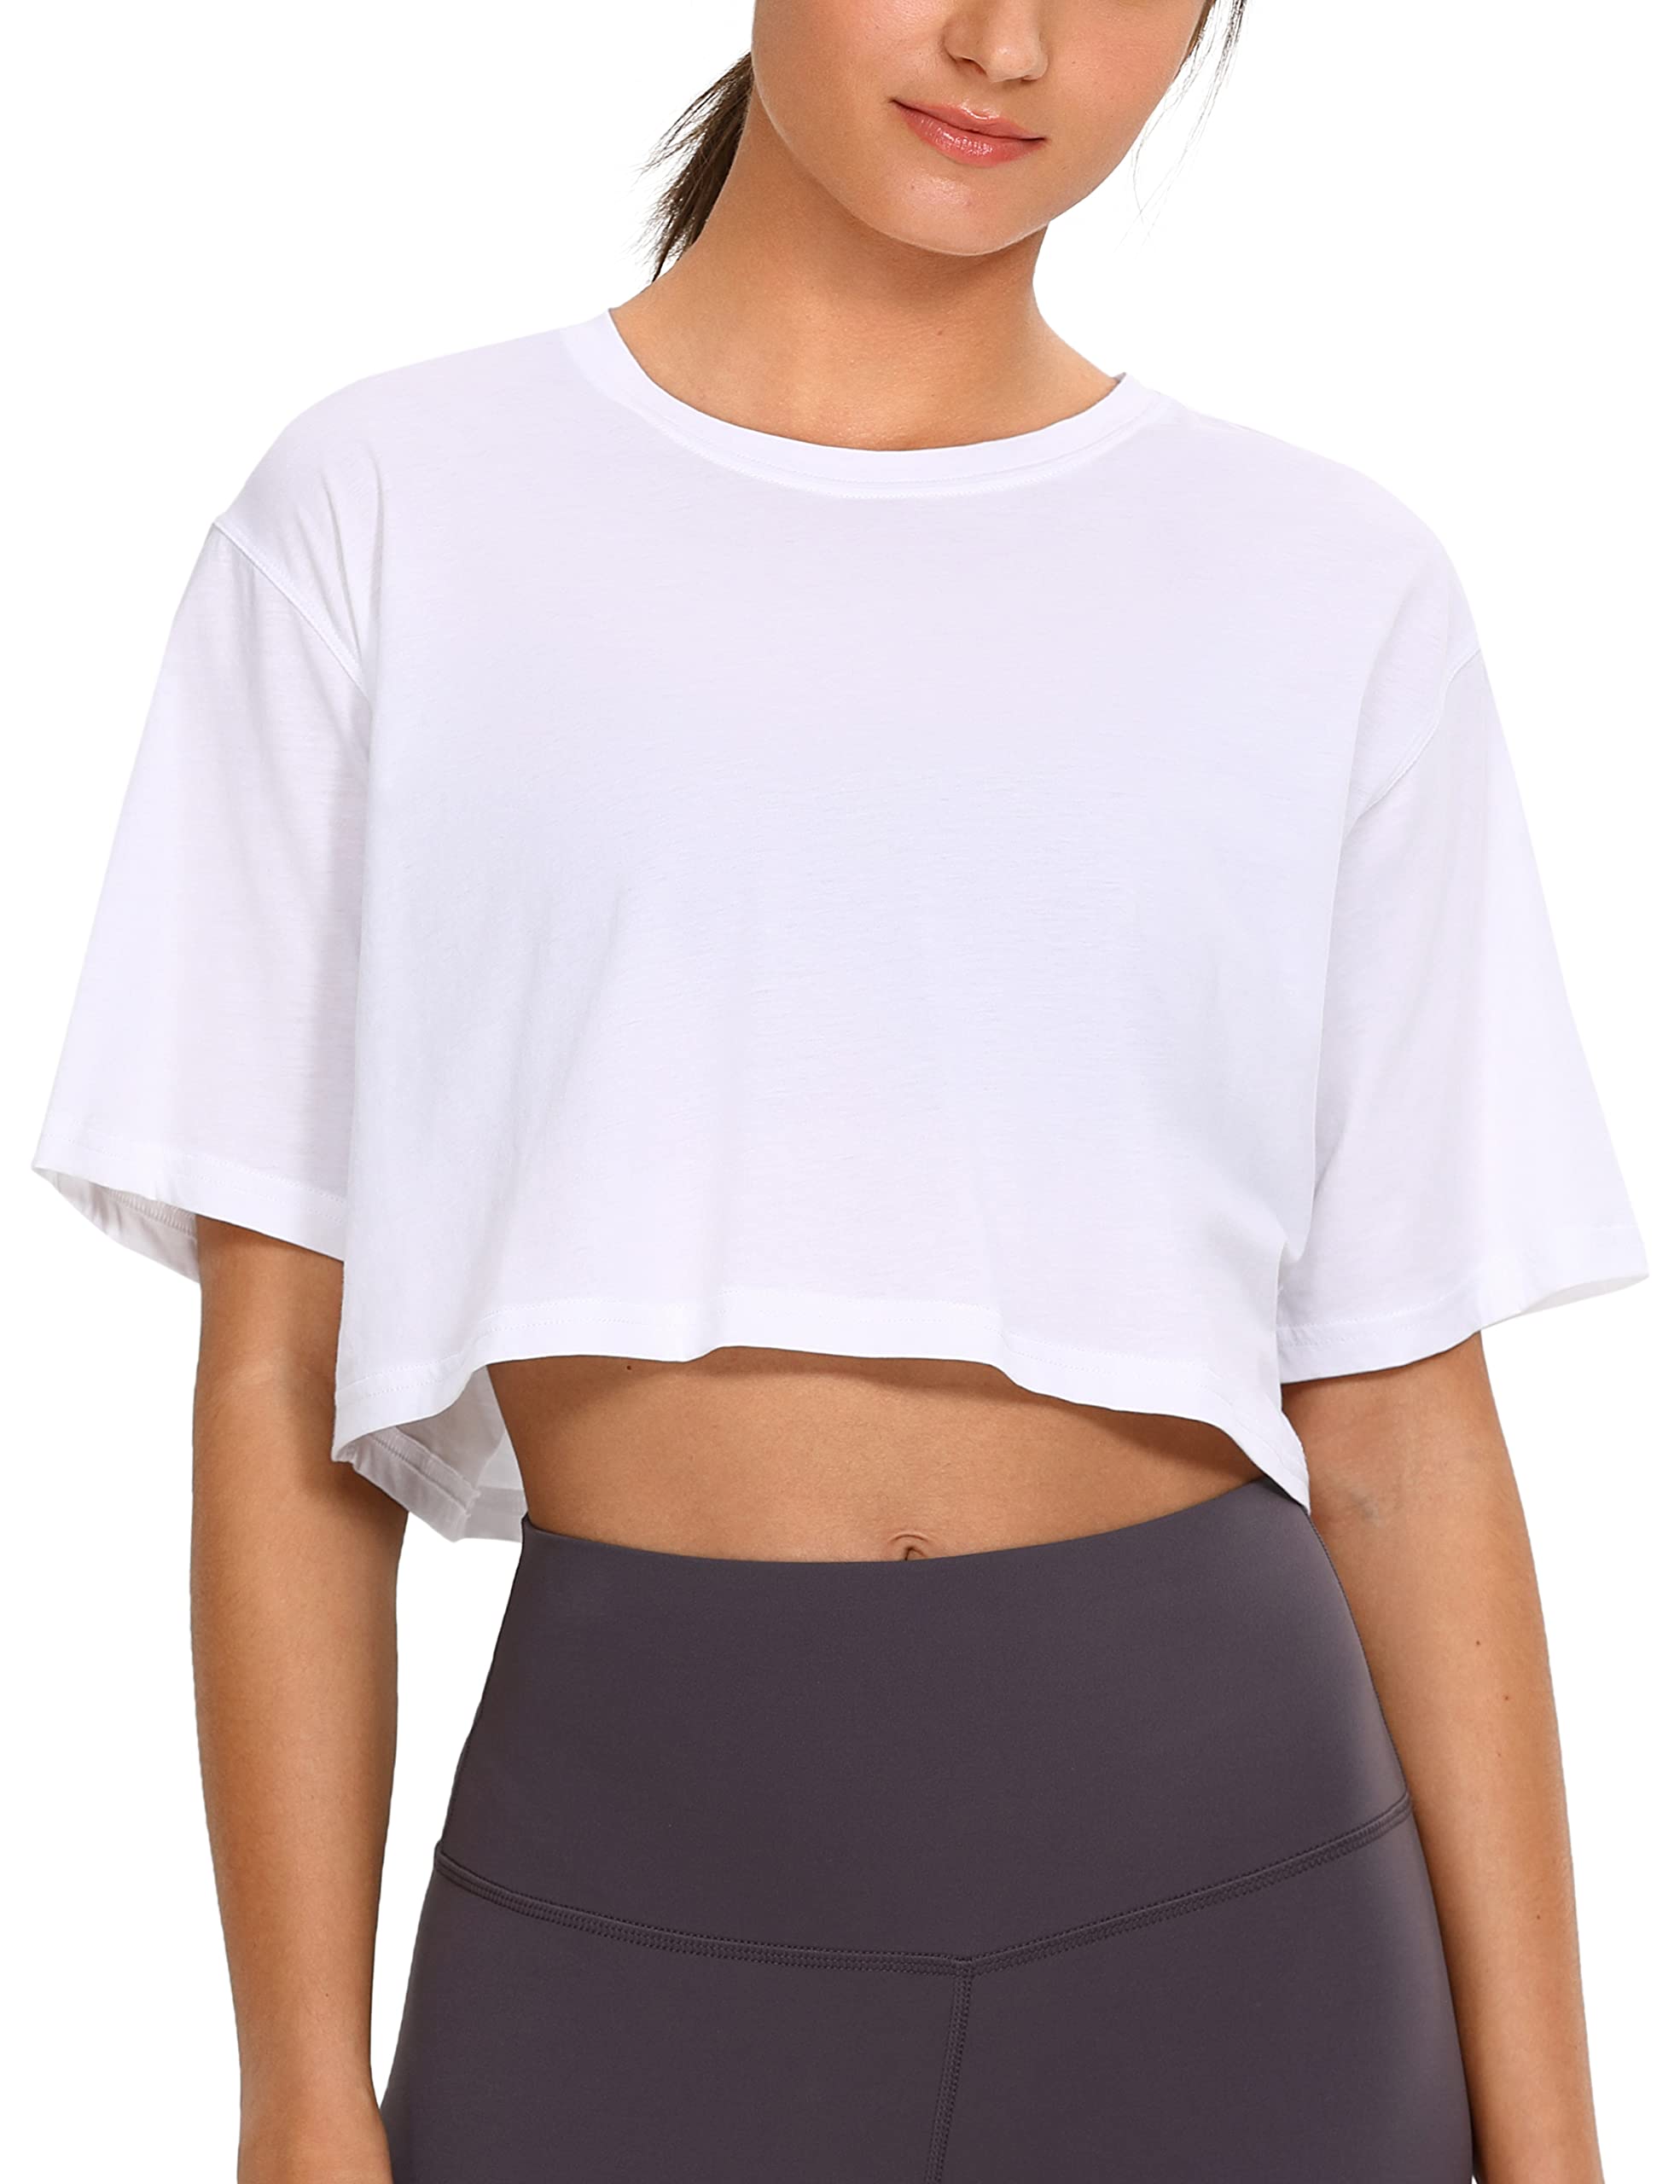 CRZ YOGA Women's Casual Relaxed Fit Pima Cotton Short Sleeve Cropped